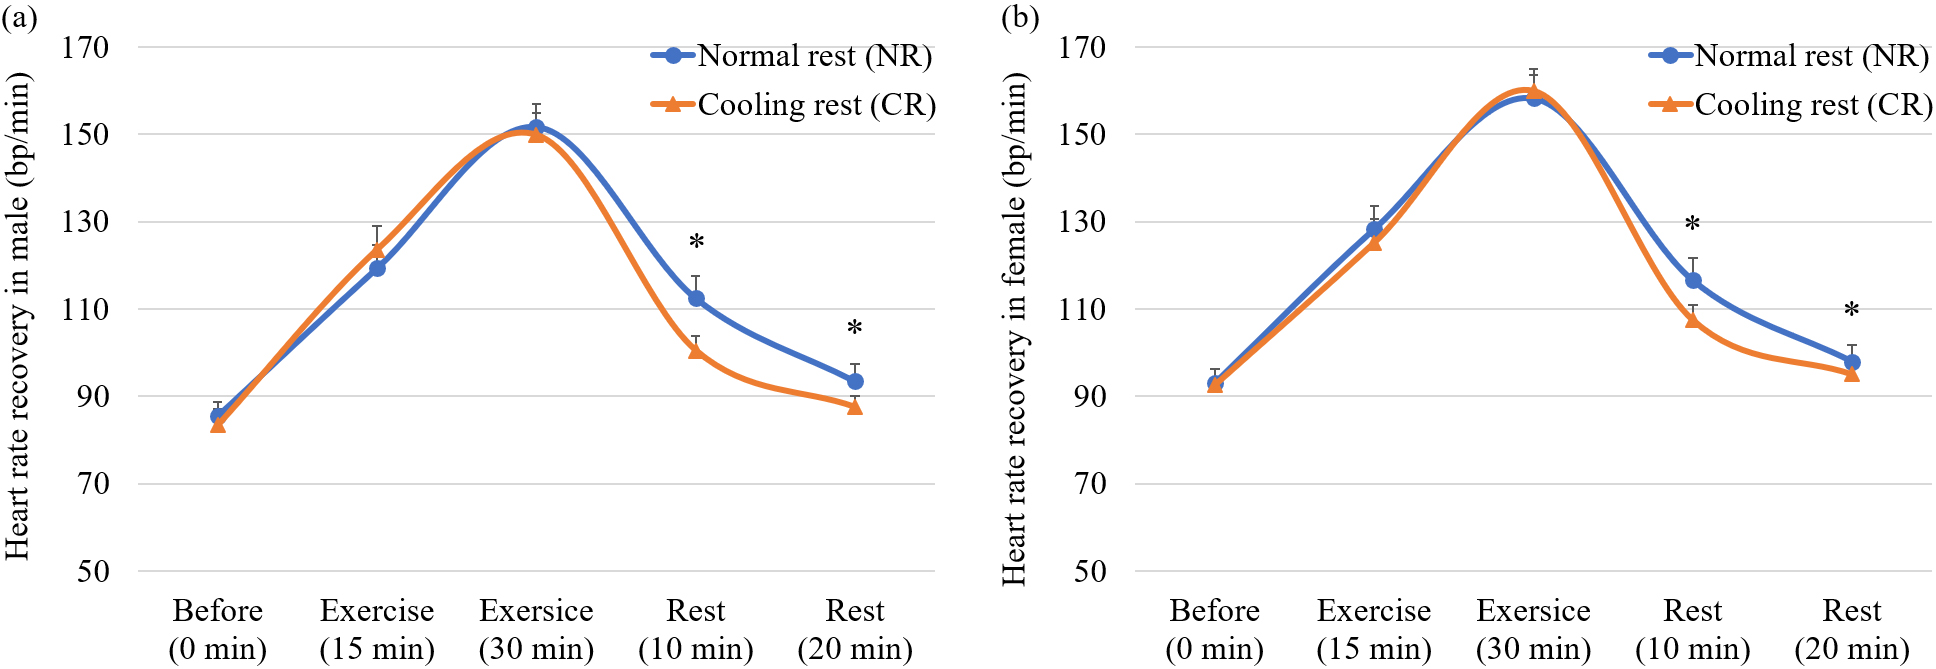 Heart rate recovery (mean ± SD) of (a) males and (b) females with normal rest and cooling rest. Asterisk denotes significant differences with the control group at P< 0.05.